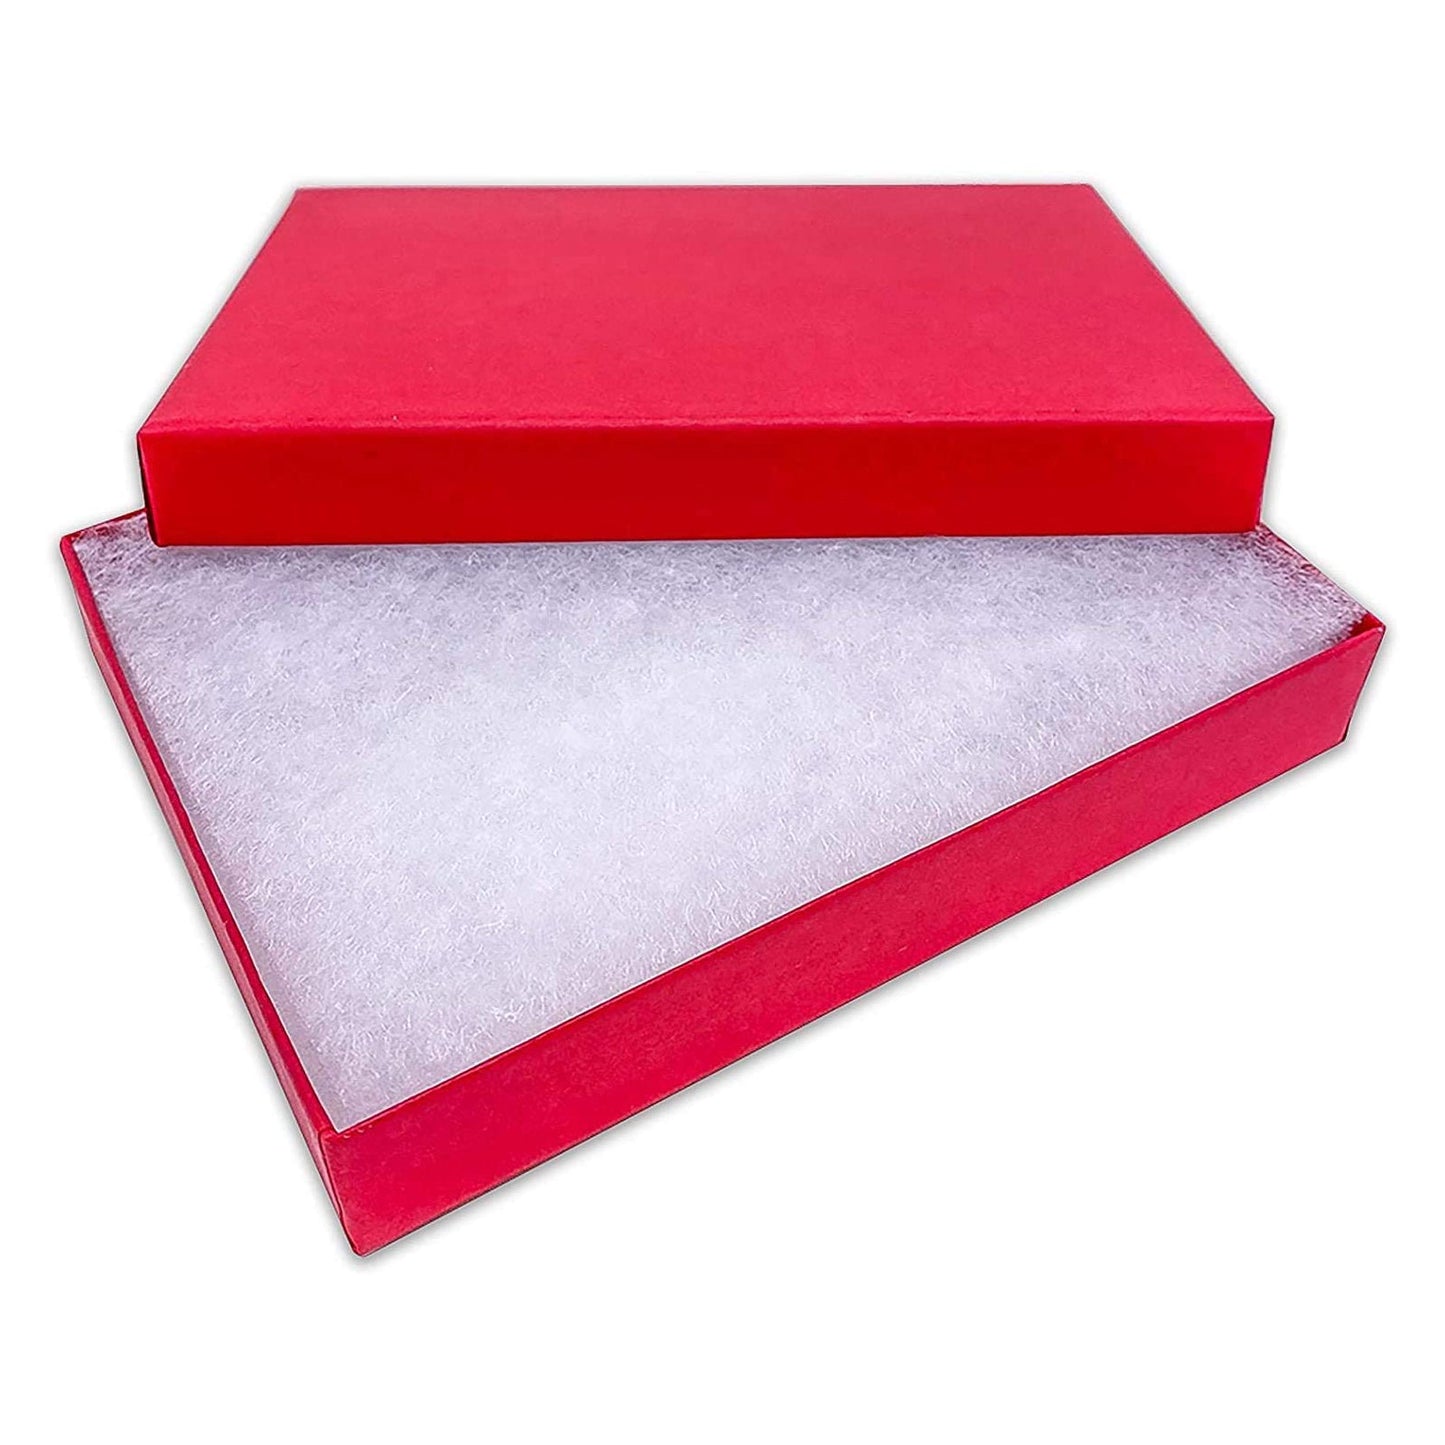 #75 - 7 1/8" x 5 3/16" Matte Red Cotton Filled Paper Box